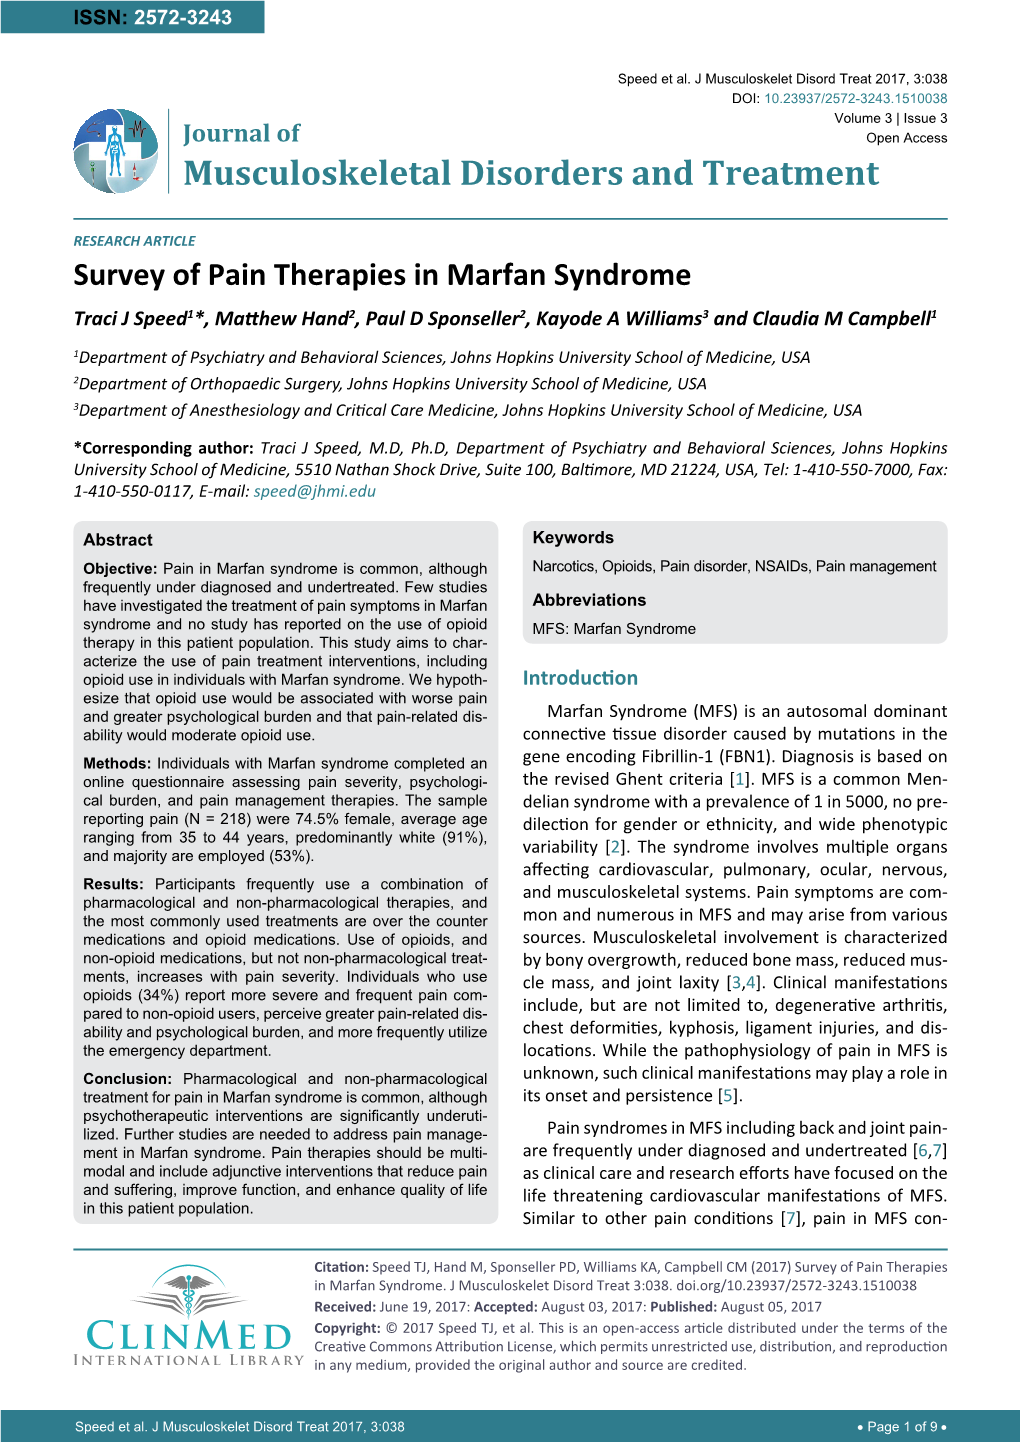 Survey of Pain Therapies in Marfan Syndrome Traci J Speed1*, Matthew Hand2, Paul D Sponseller2, Kayode a Williams3 and Claudia M Campbell1